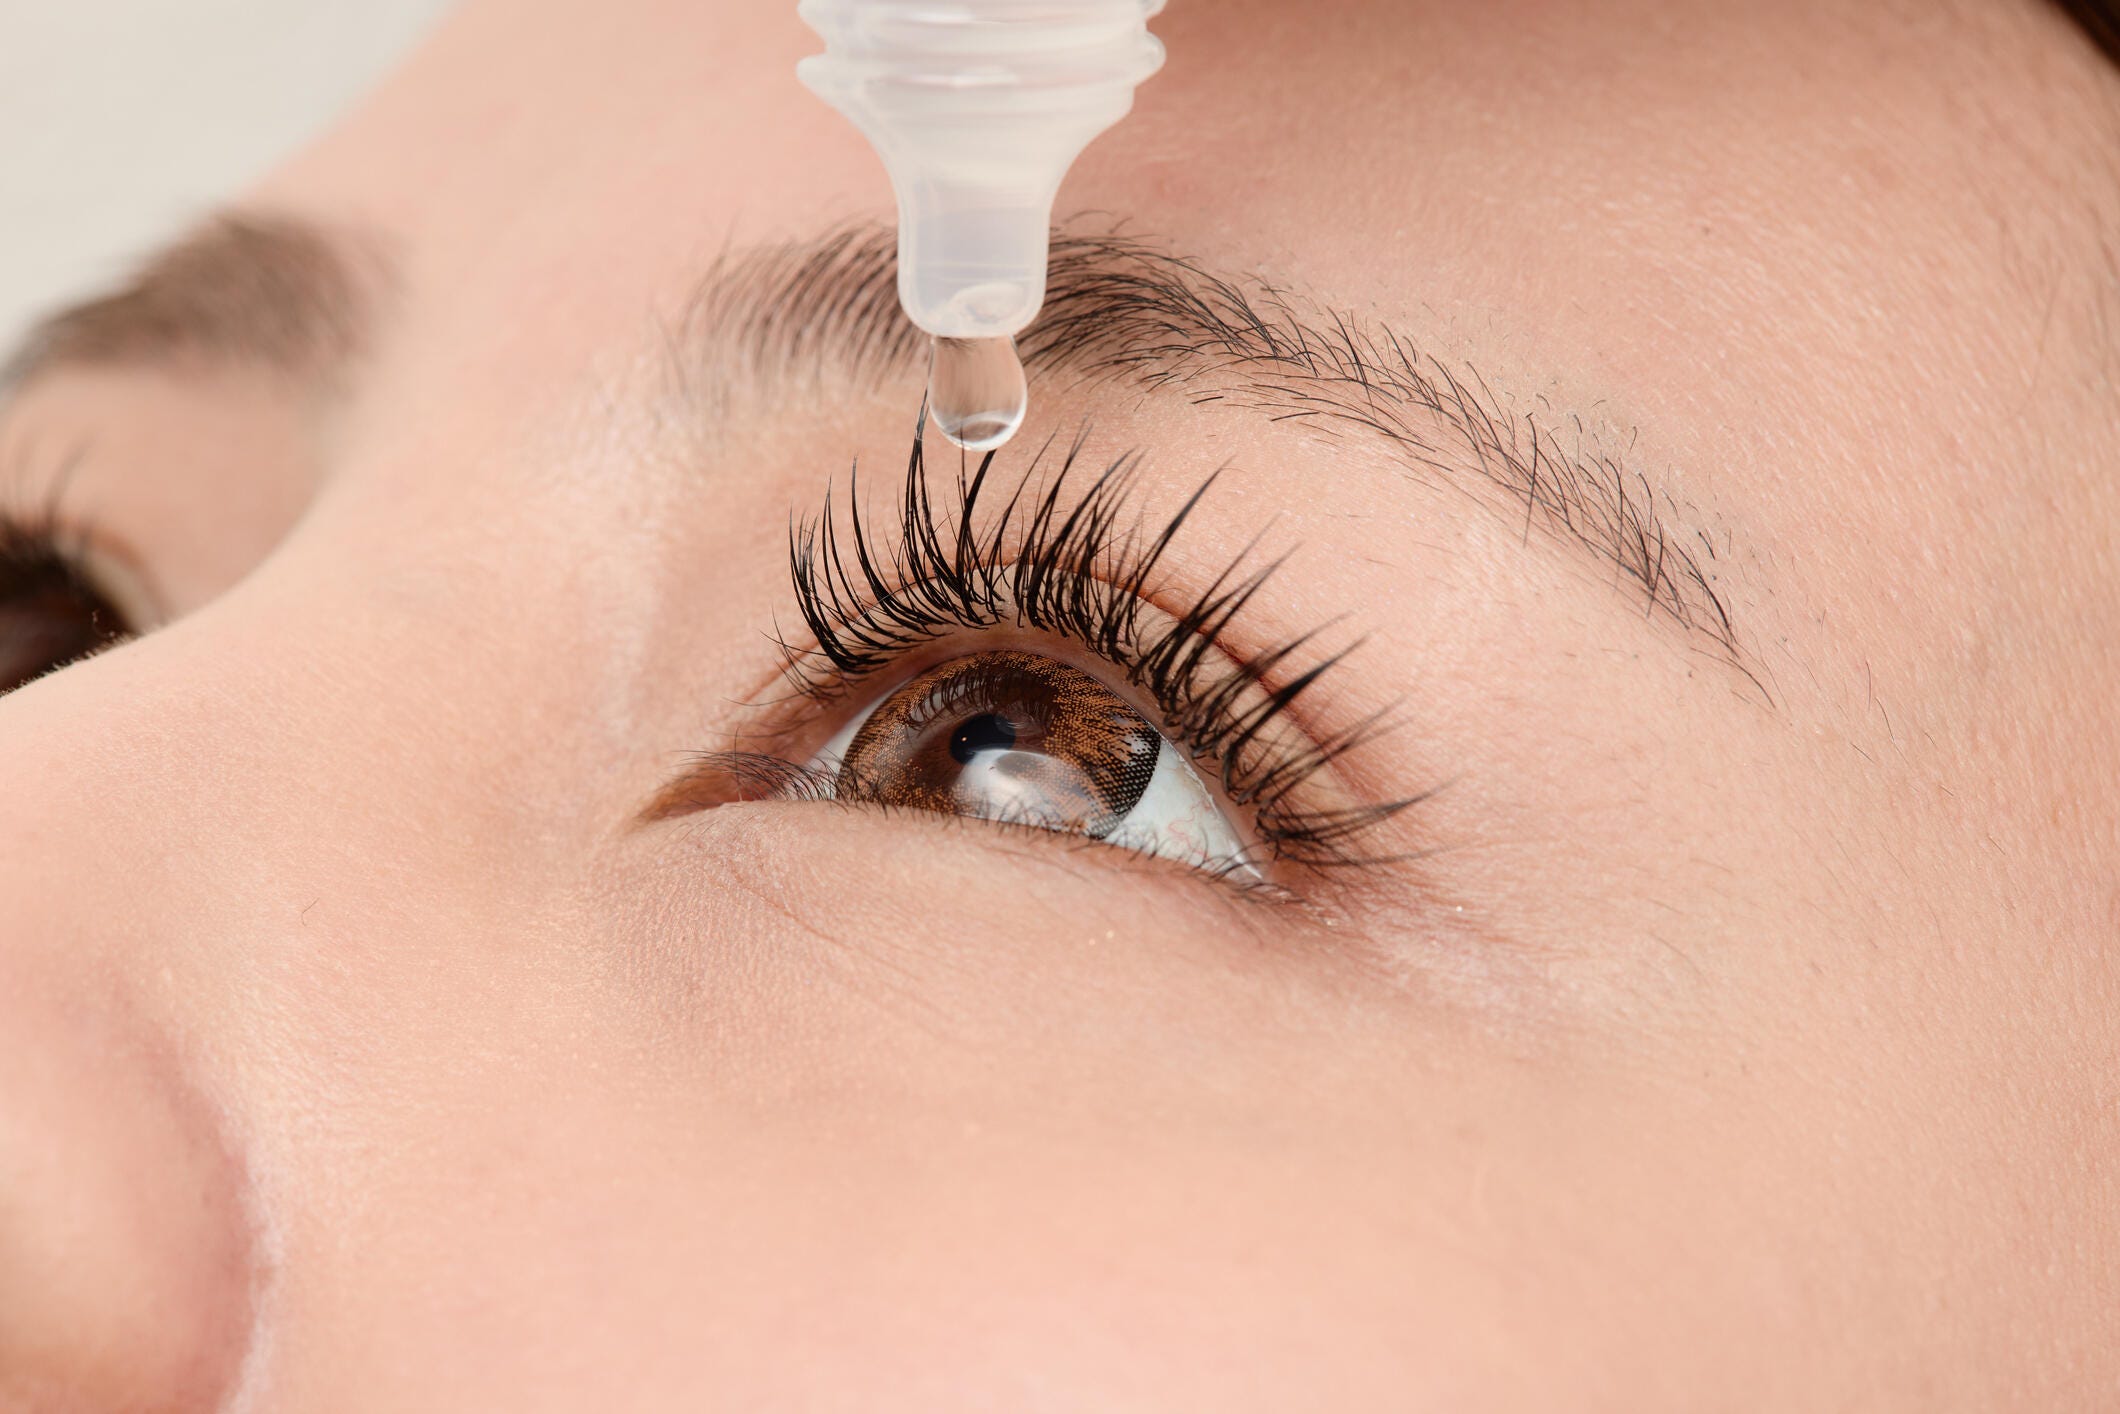 Everything You Need to Know About Safe Eye Drops Amid Recent Recalls